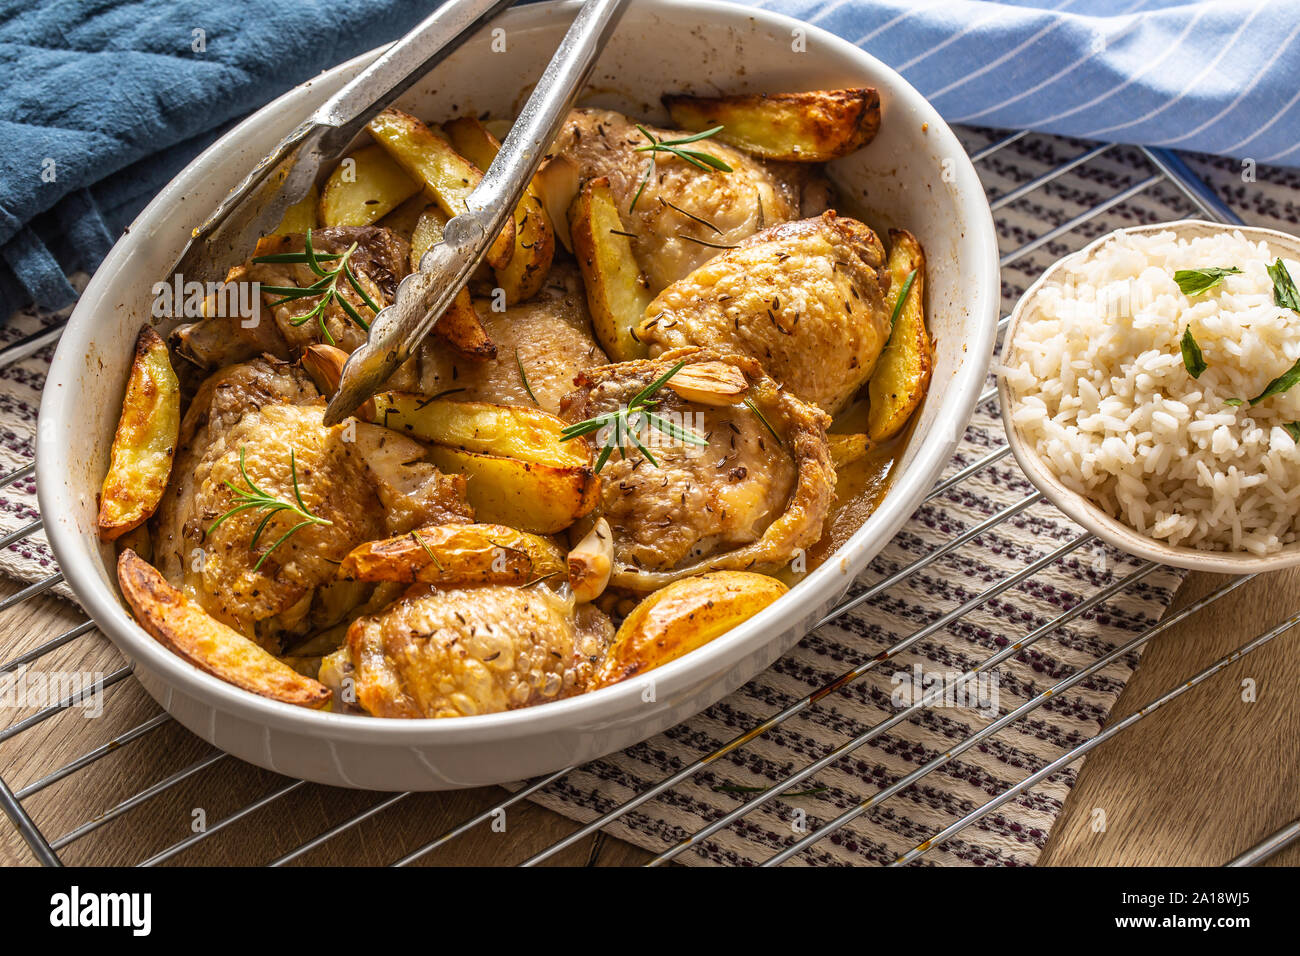 Chicken legs roasted with american potatoes in baking dish Stock Photo